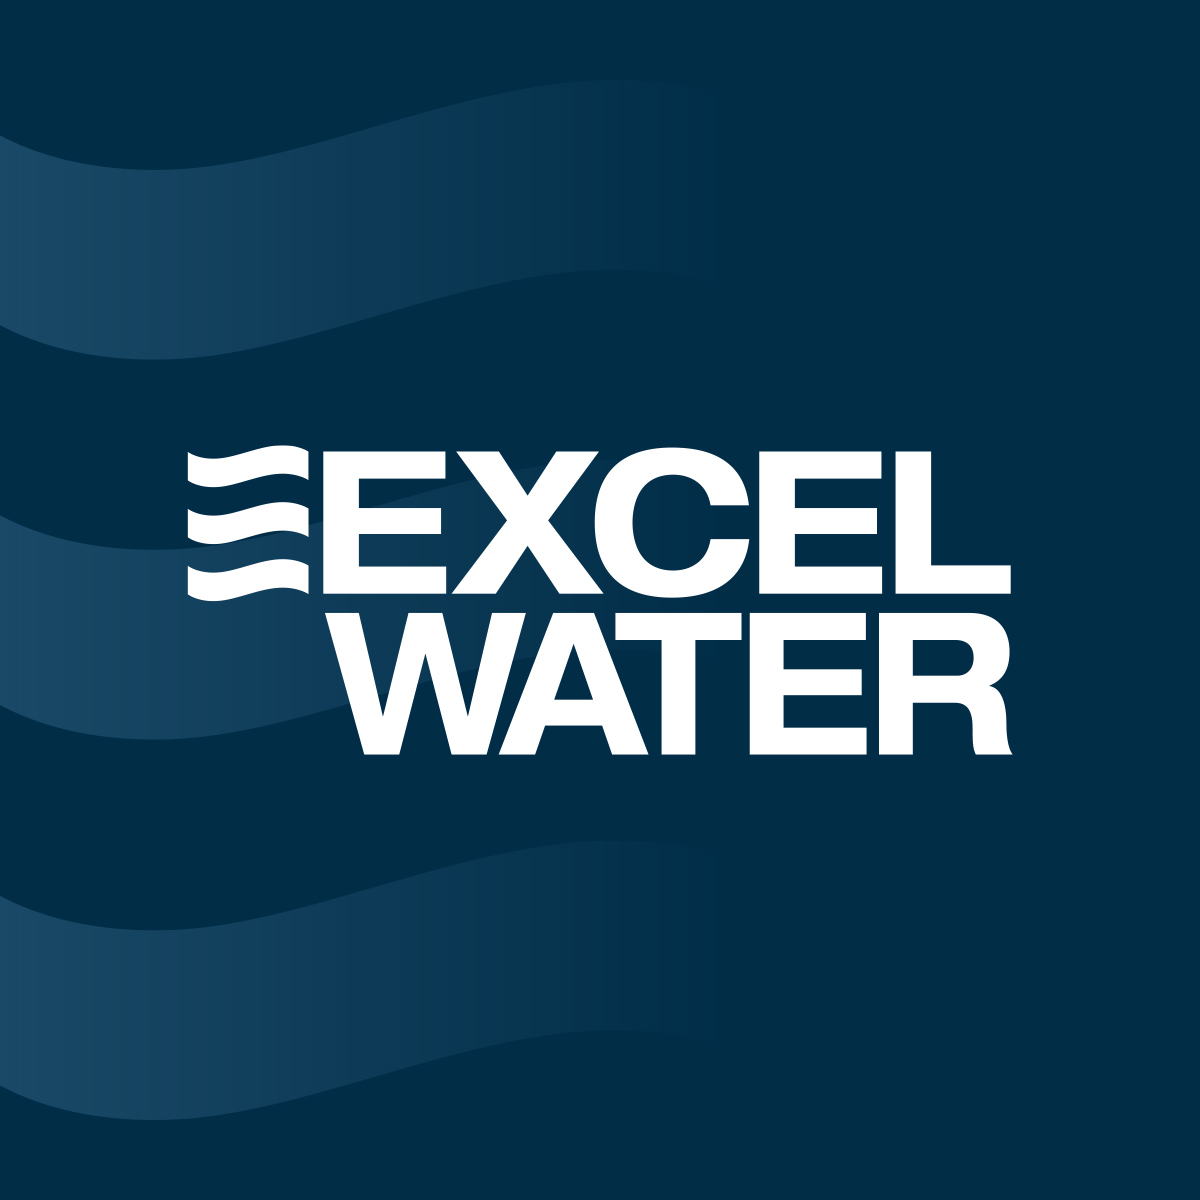 (c) Excelwater.co.uk